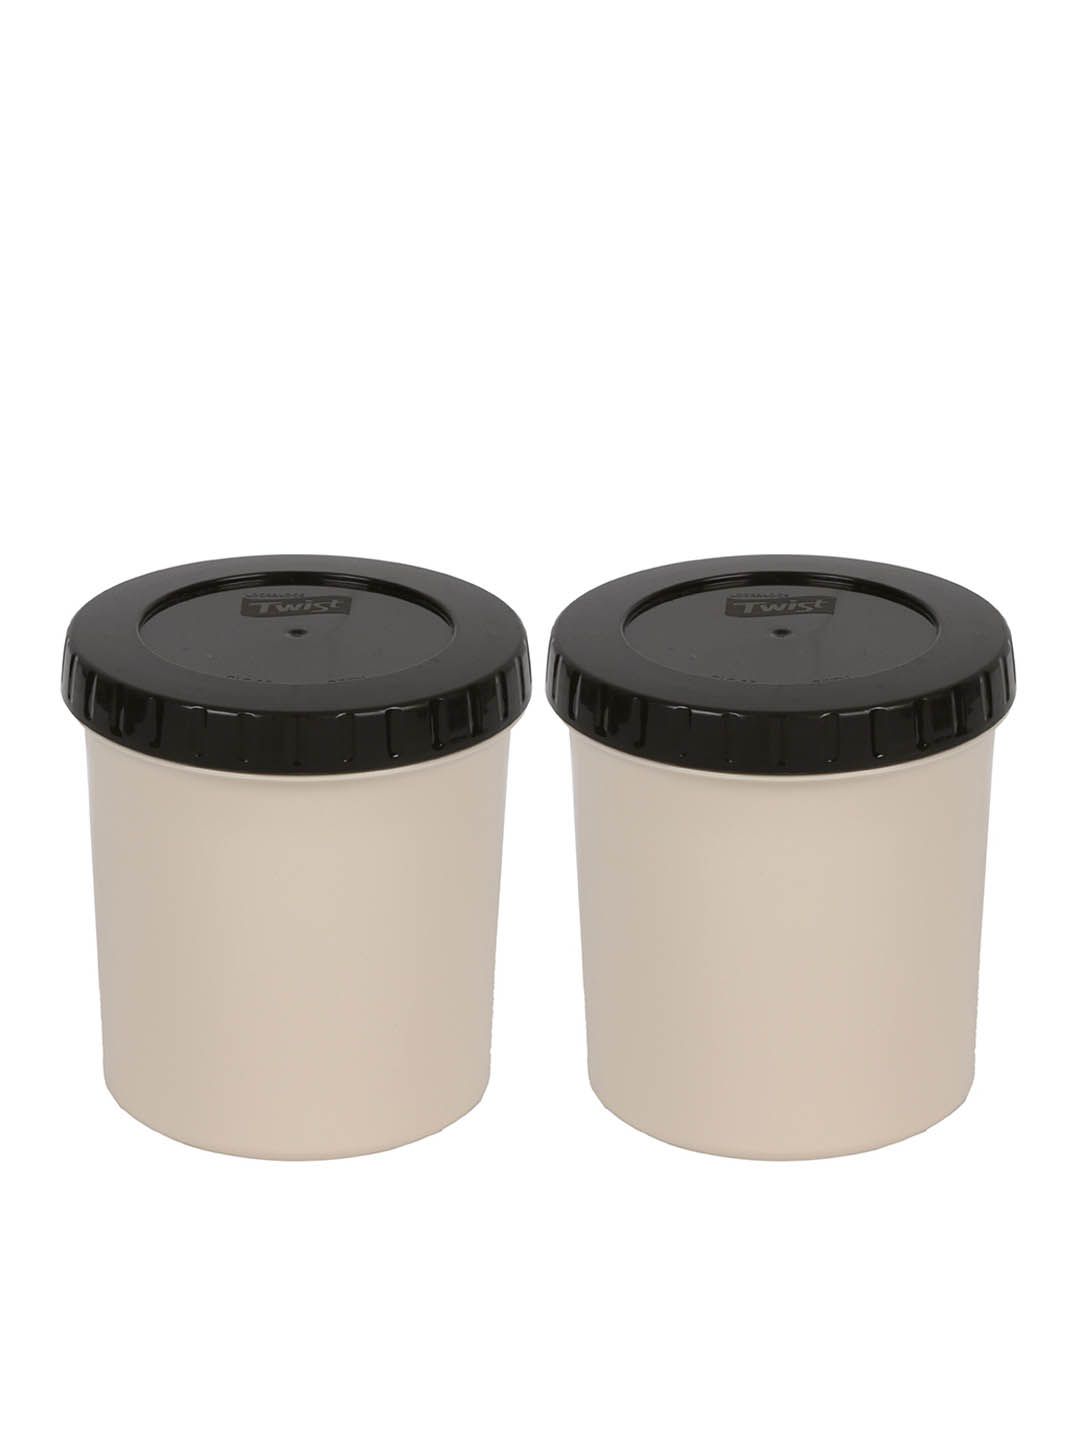 Lock & Lock Set of 2 Solid Round Plastic Food Storage Containers Price in India